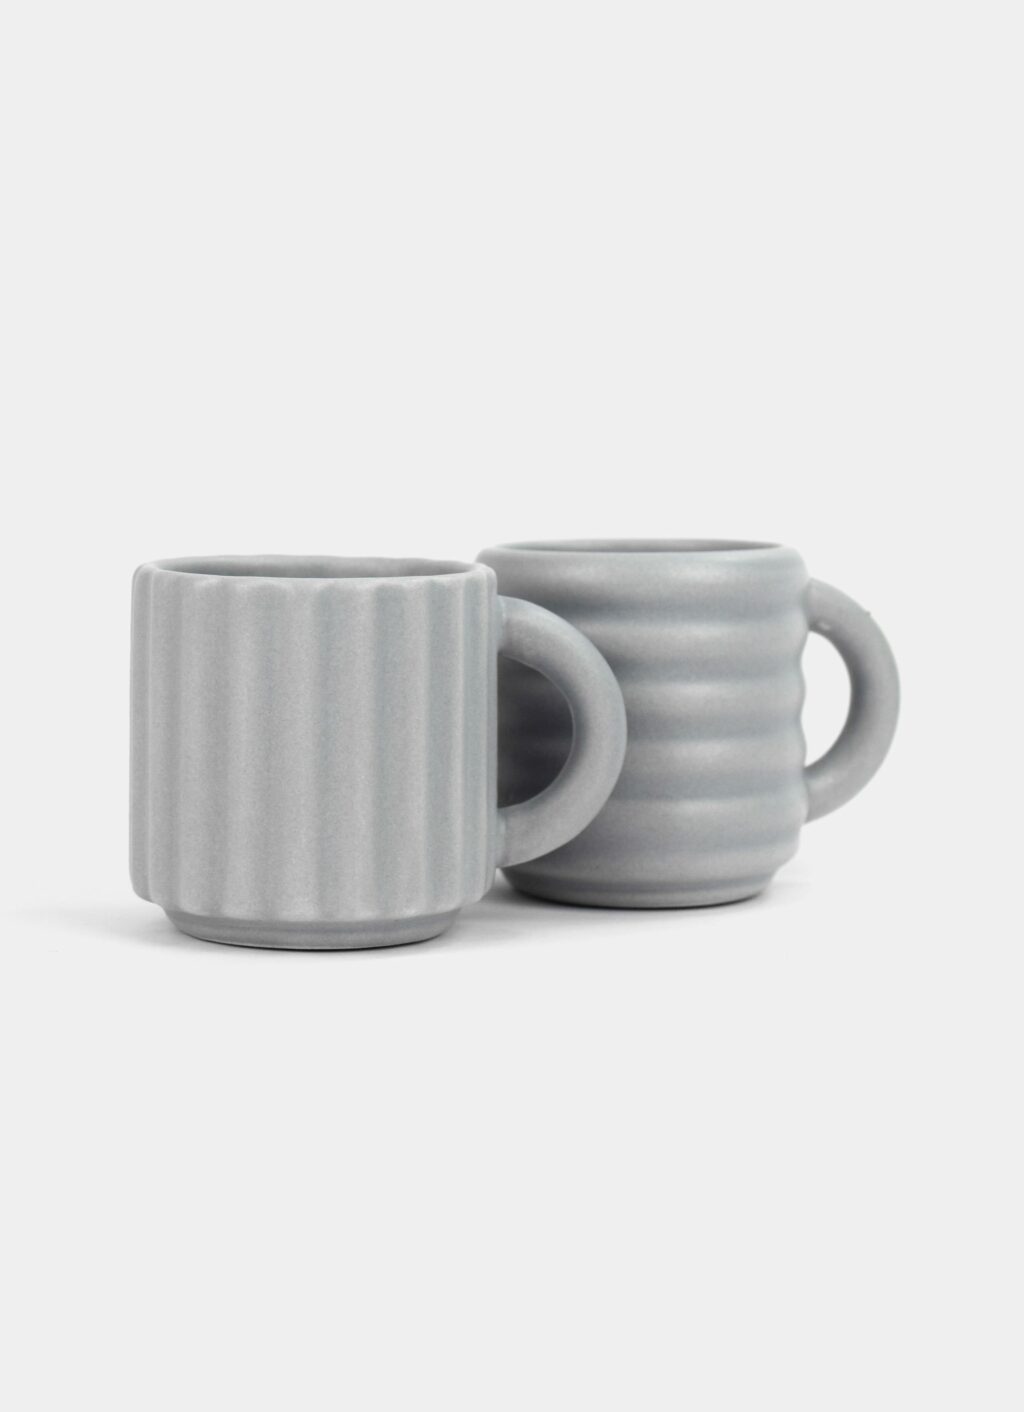 Form and Seek - Ripple Espresso Cups - Set of Two - Grey